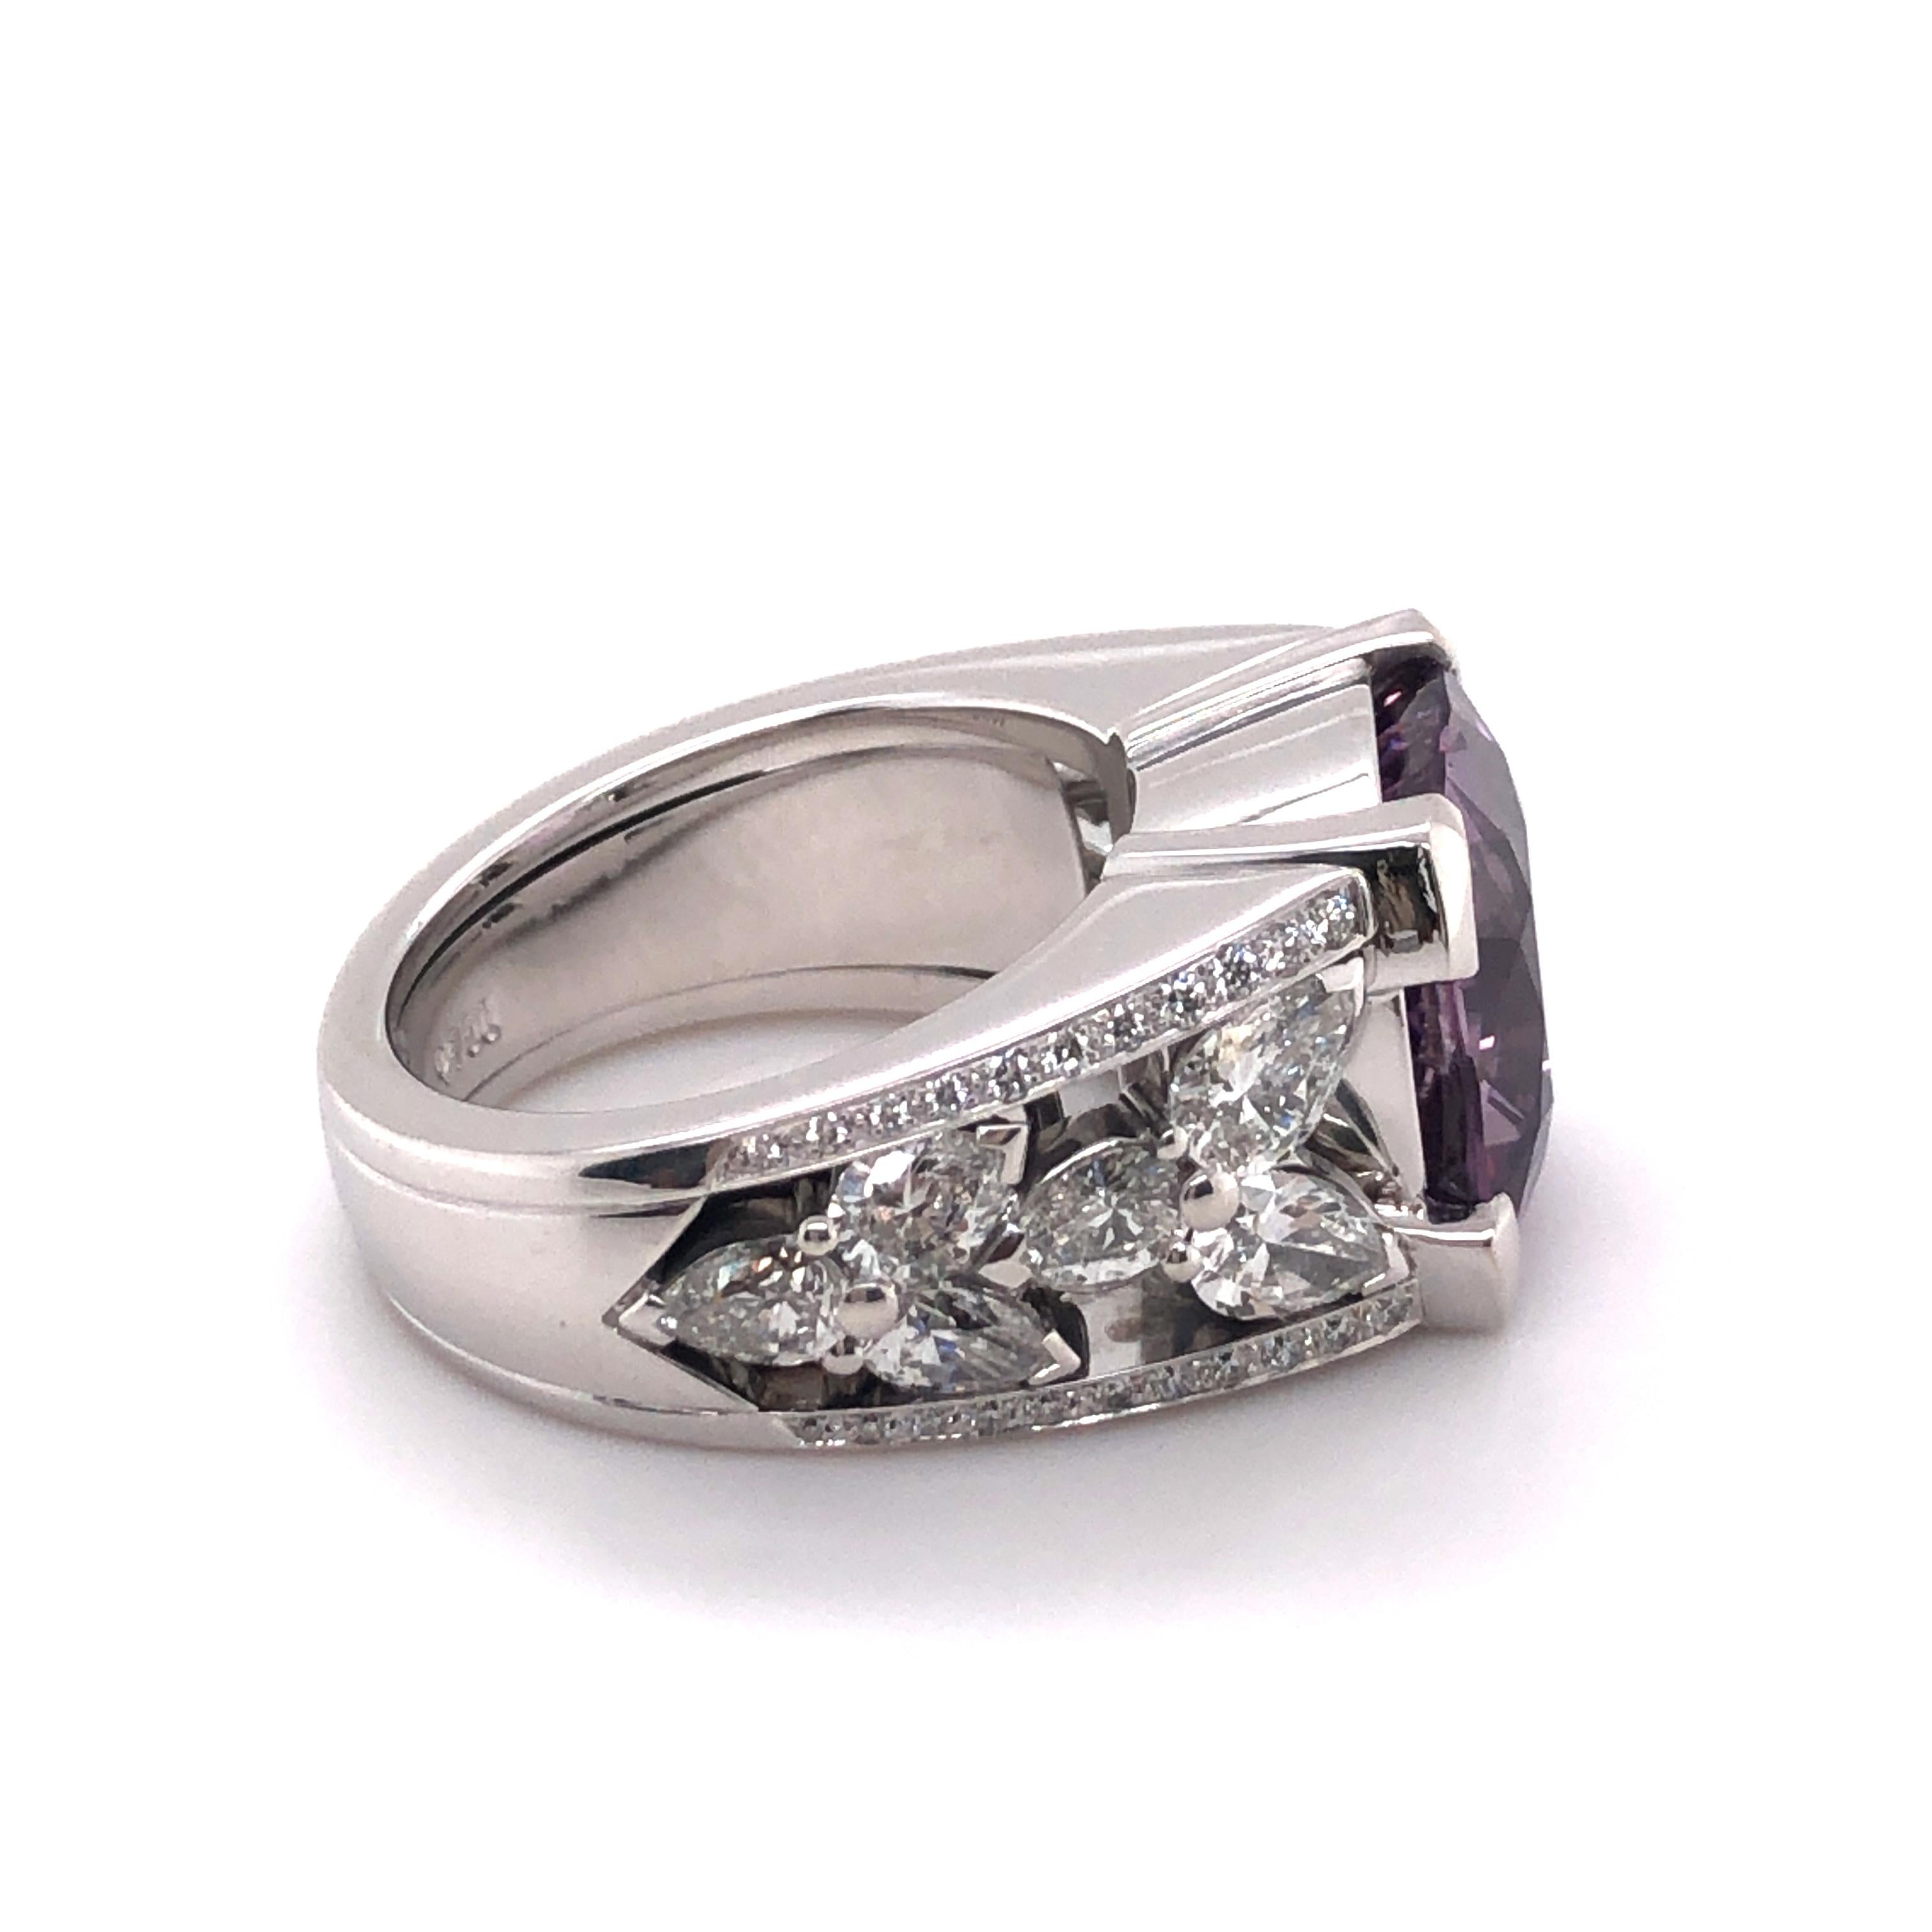 Certified 8.90 Ct Violet Burmese Spinel and Diamond Ring in 18 Karat White Gold In Excellent Condition For Sale In Lucerne, CH